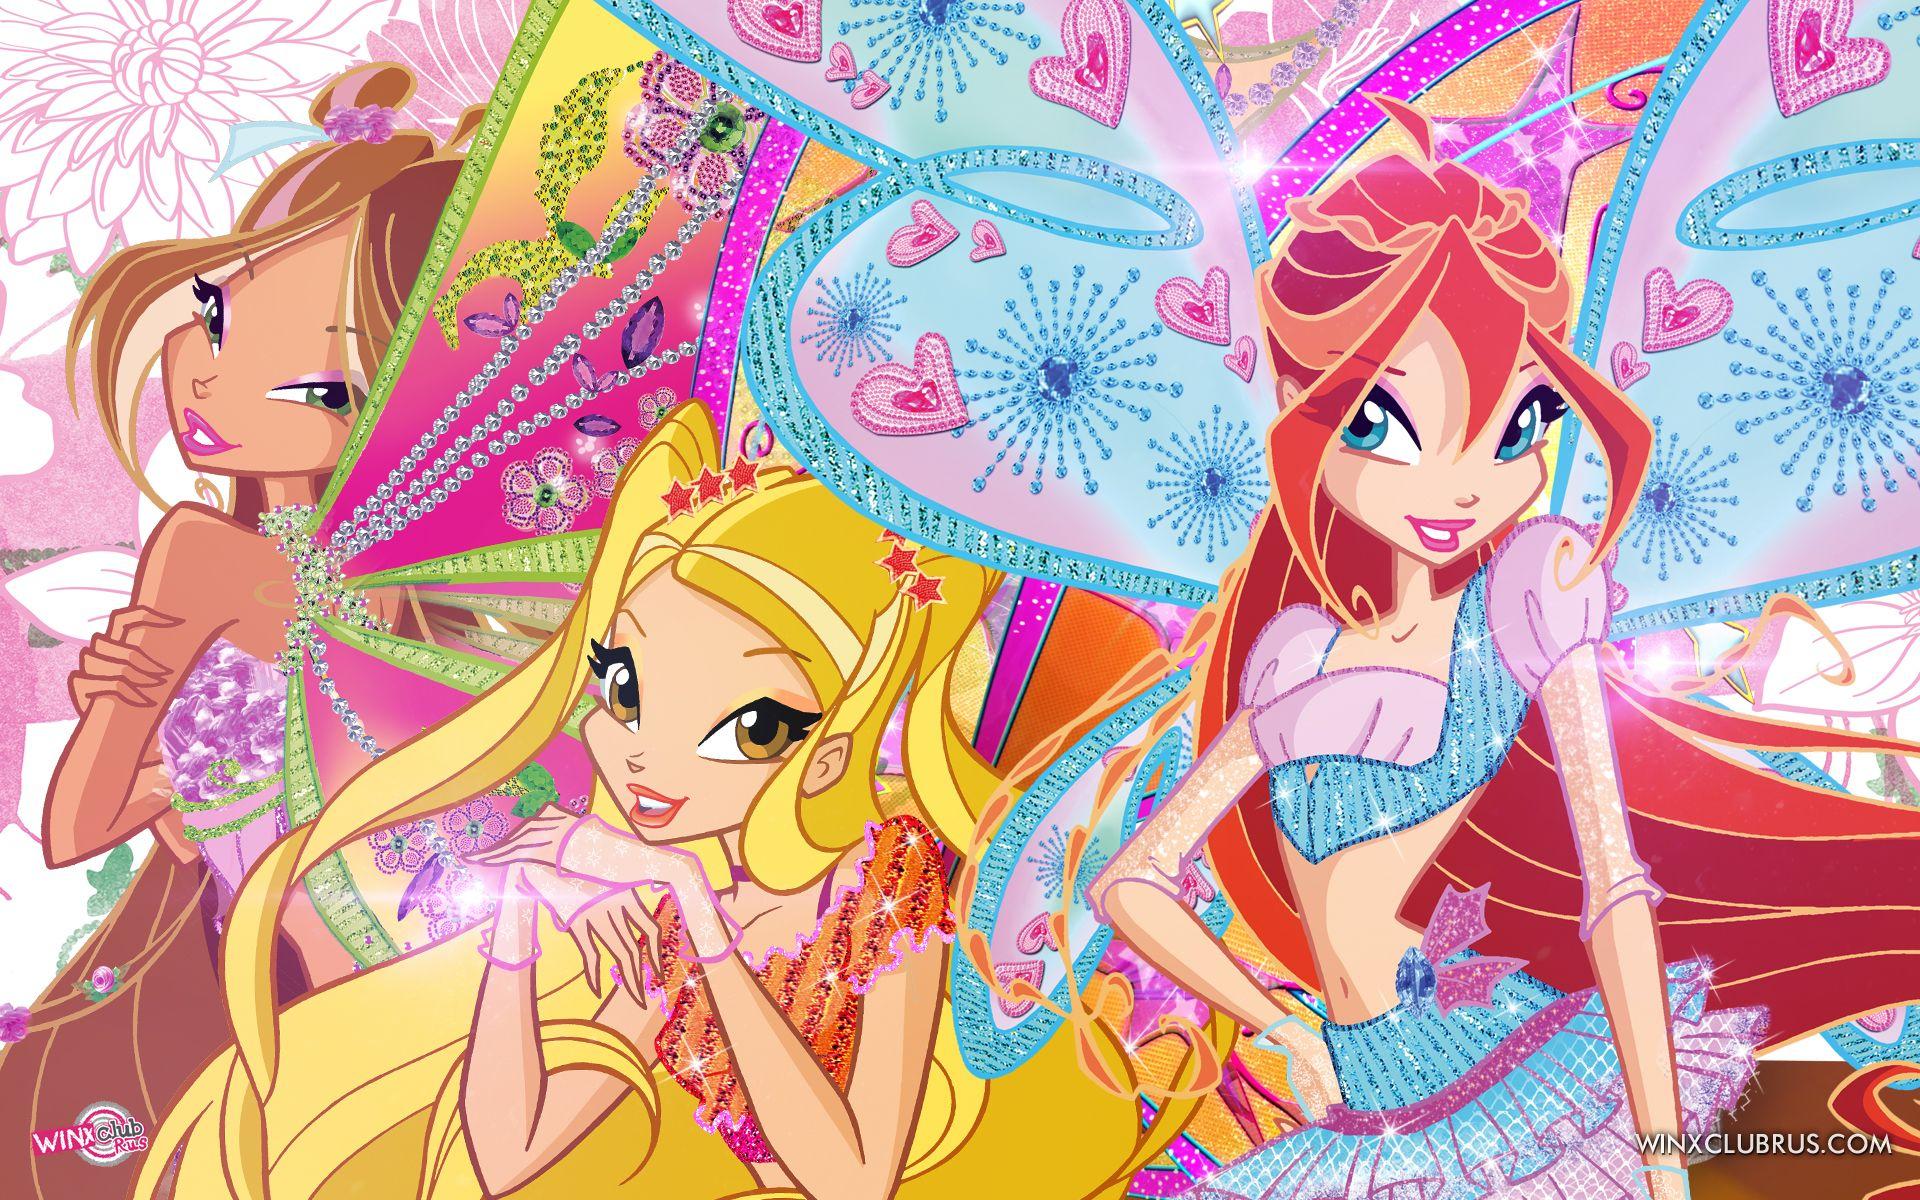 Winx Club new bright and colorful wallpaper with lots